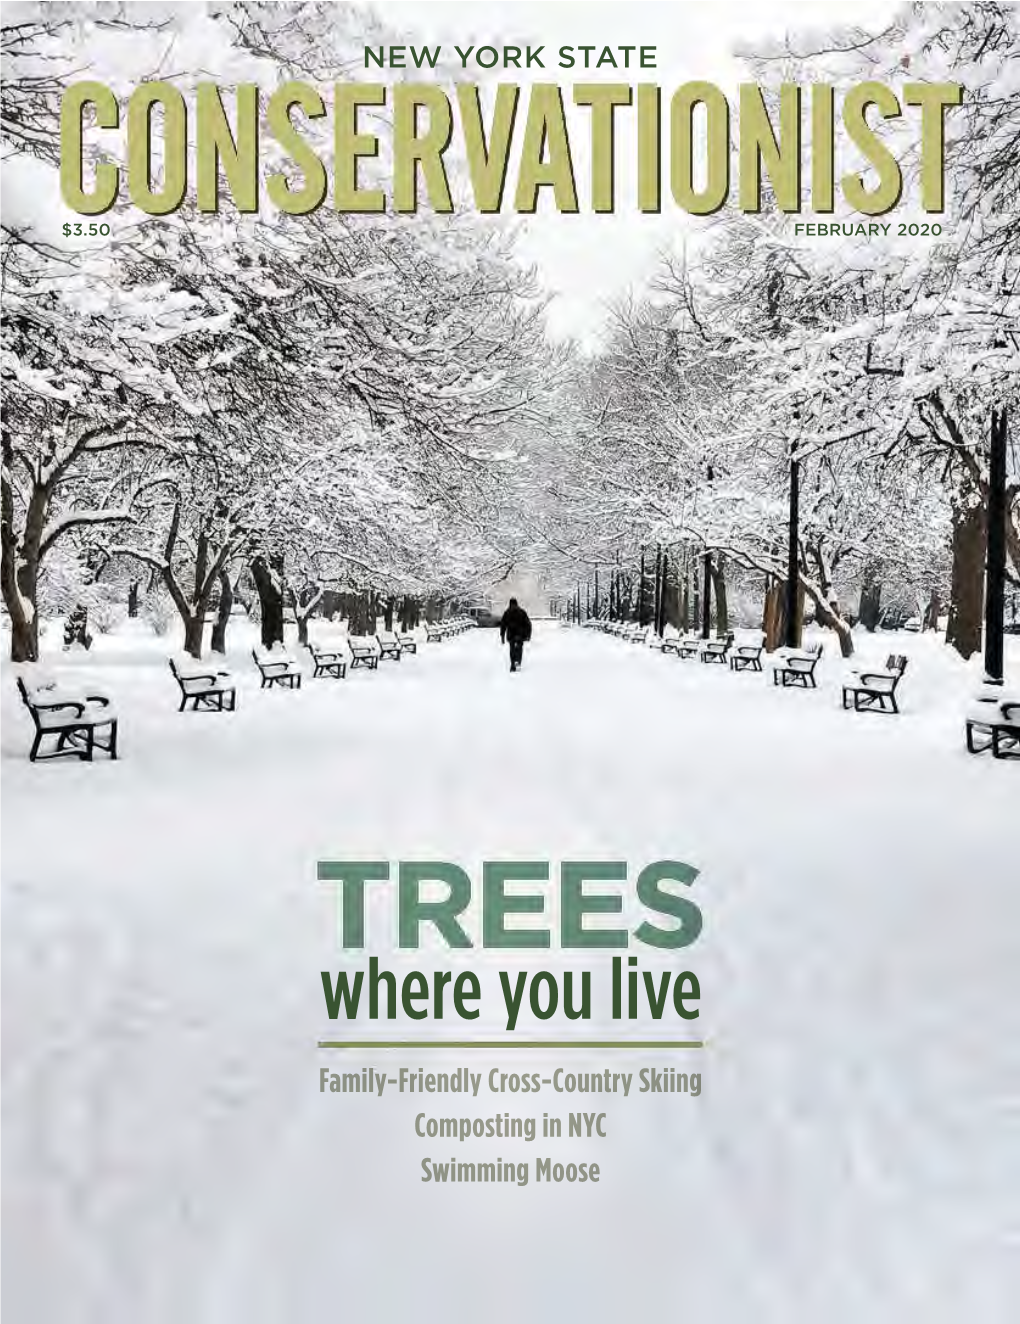 New York State Conservationist Magazine, February 2020 Issue